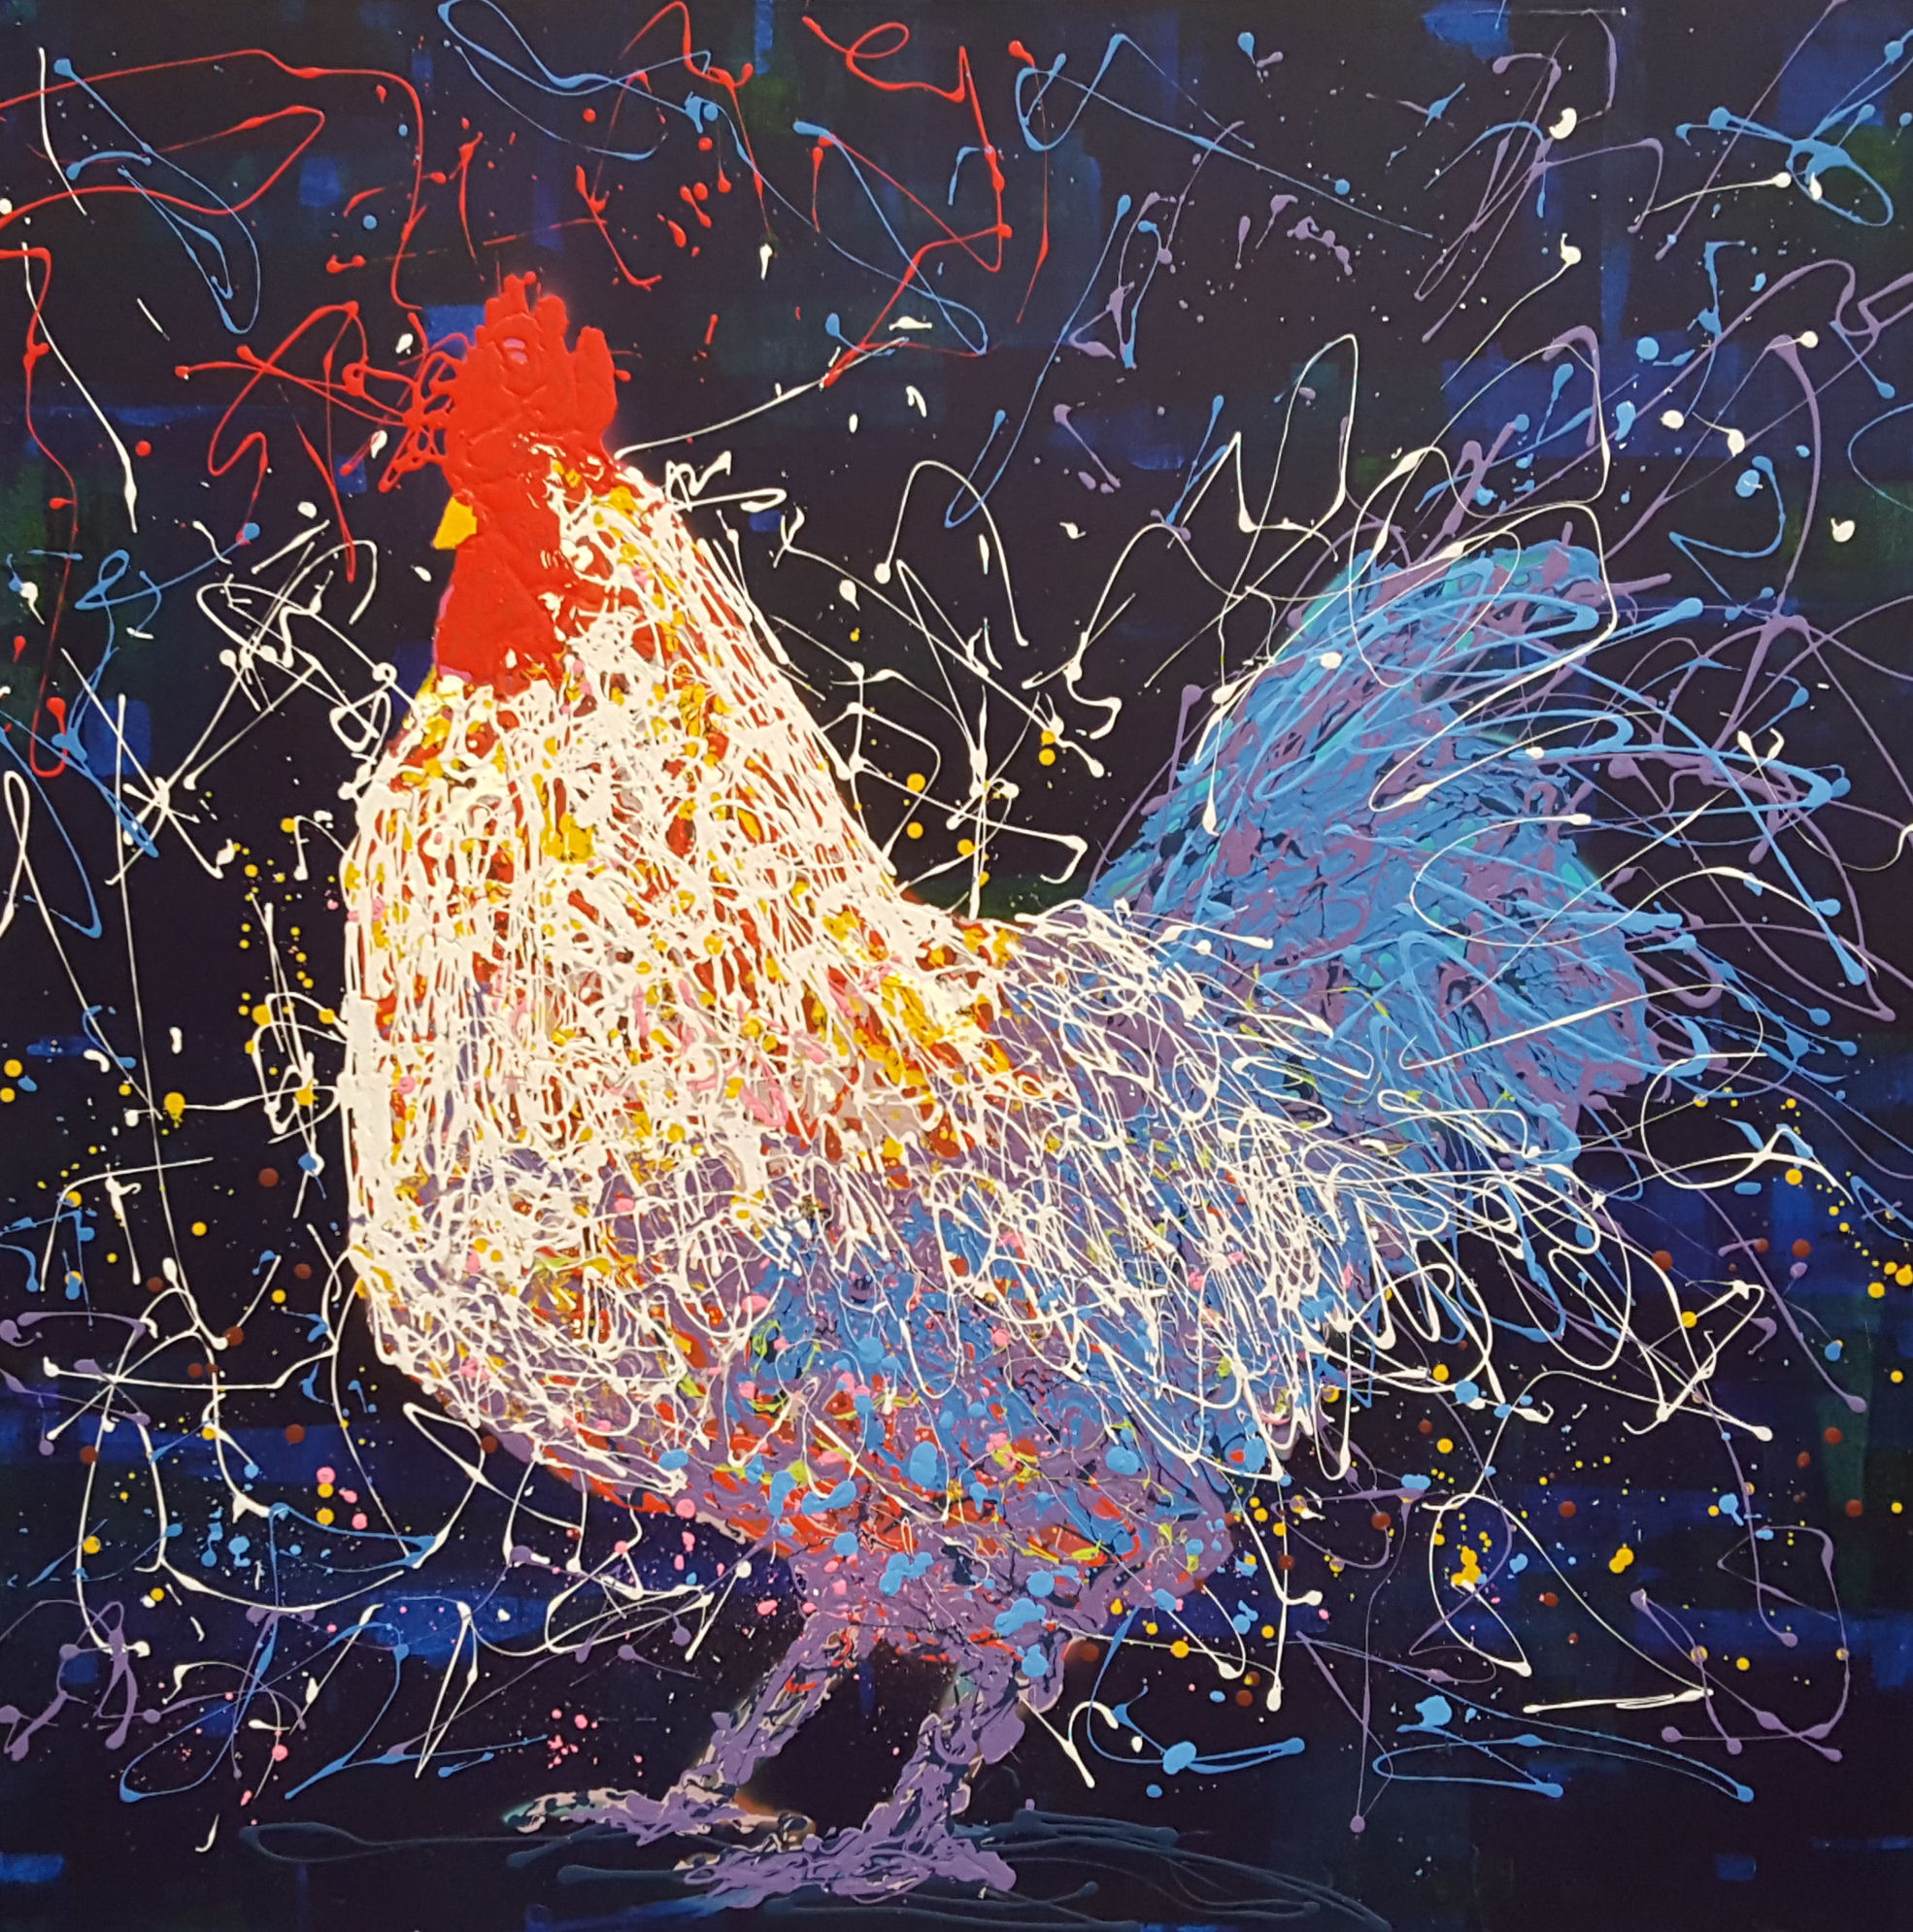  Paolo The Rooster-acrylic on canvas 48" x 48"   Boutin Gallery 